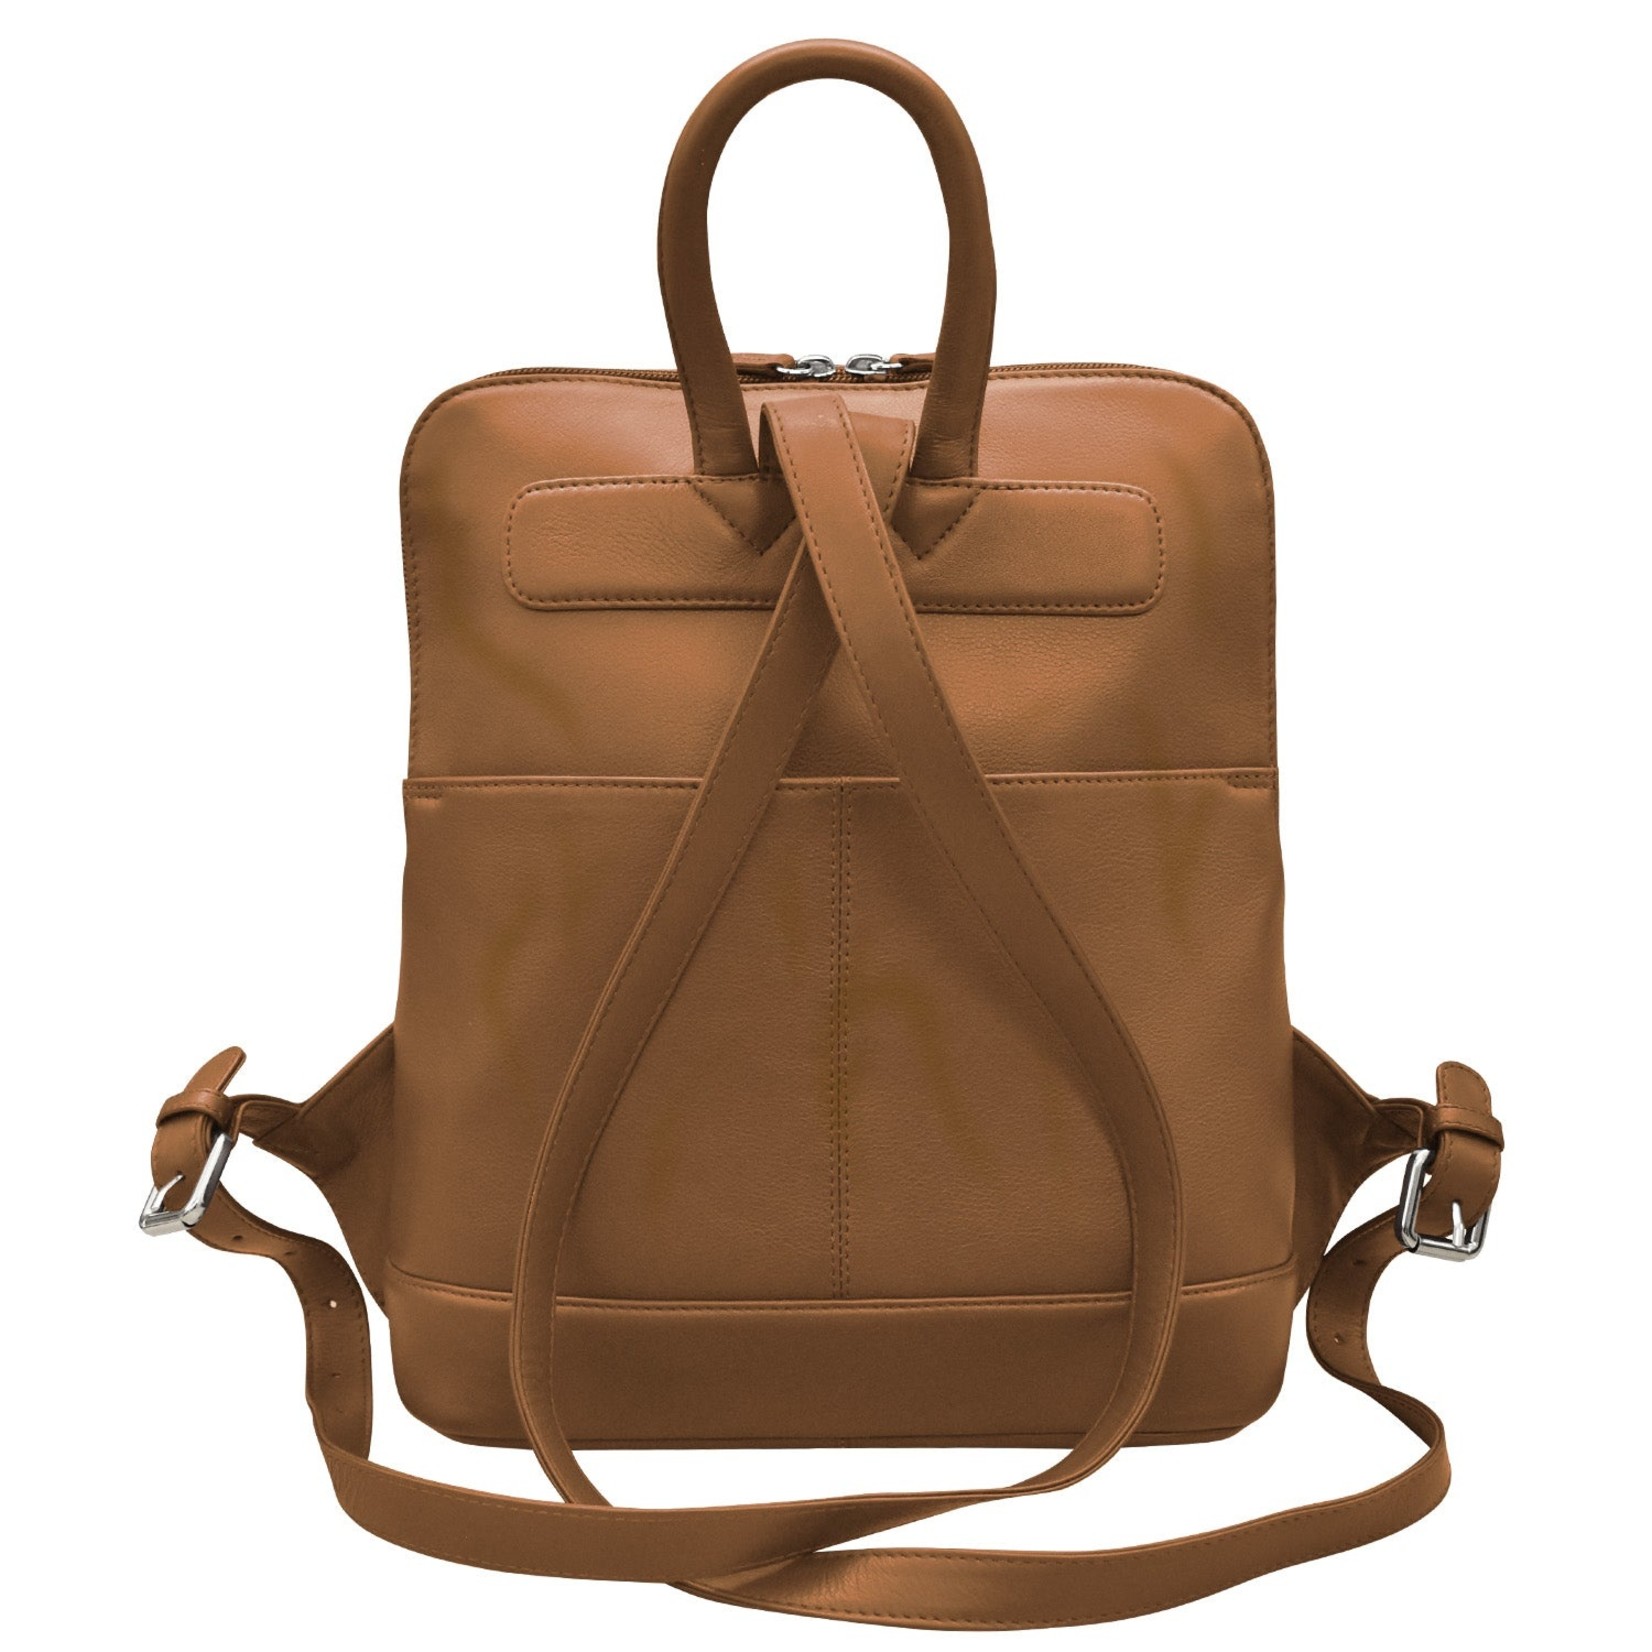 Leather Handbags and Accessories 6505 Toffee/Black - Leather Backpack